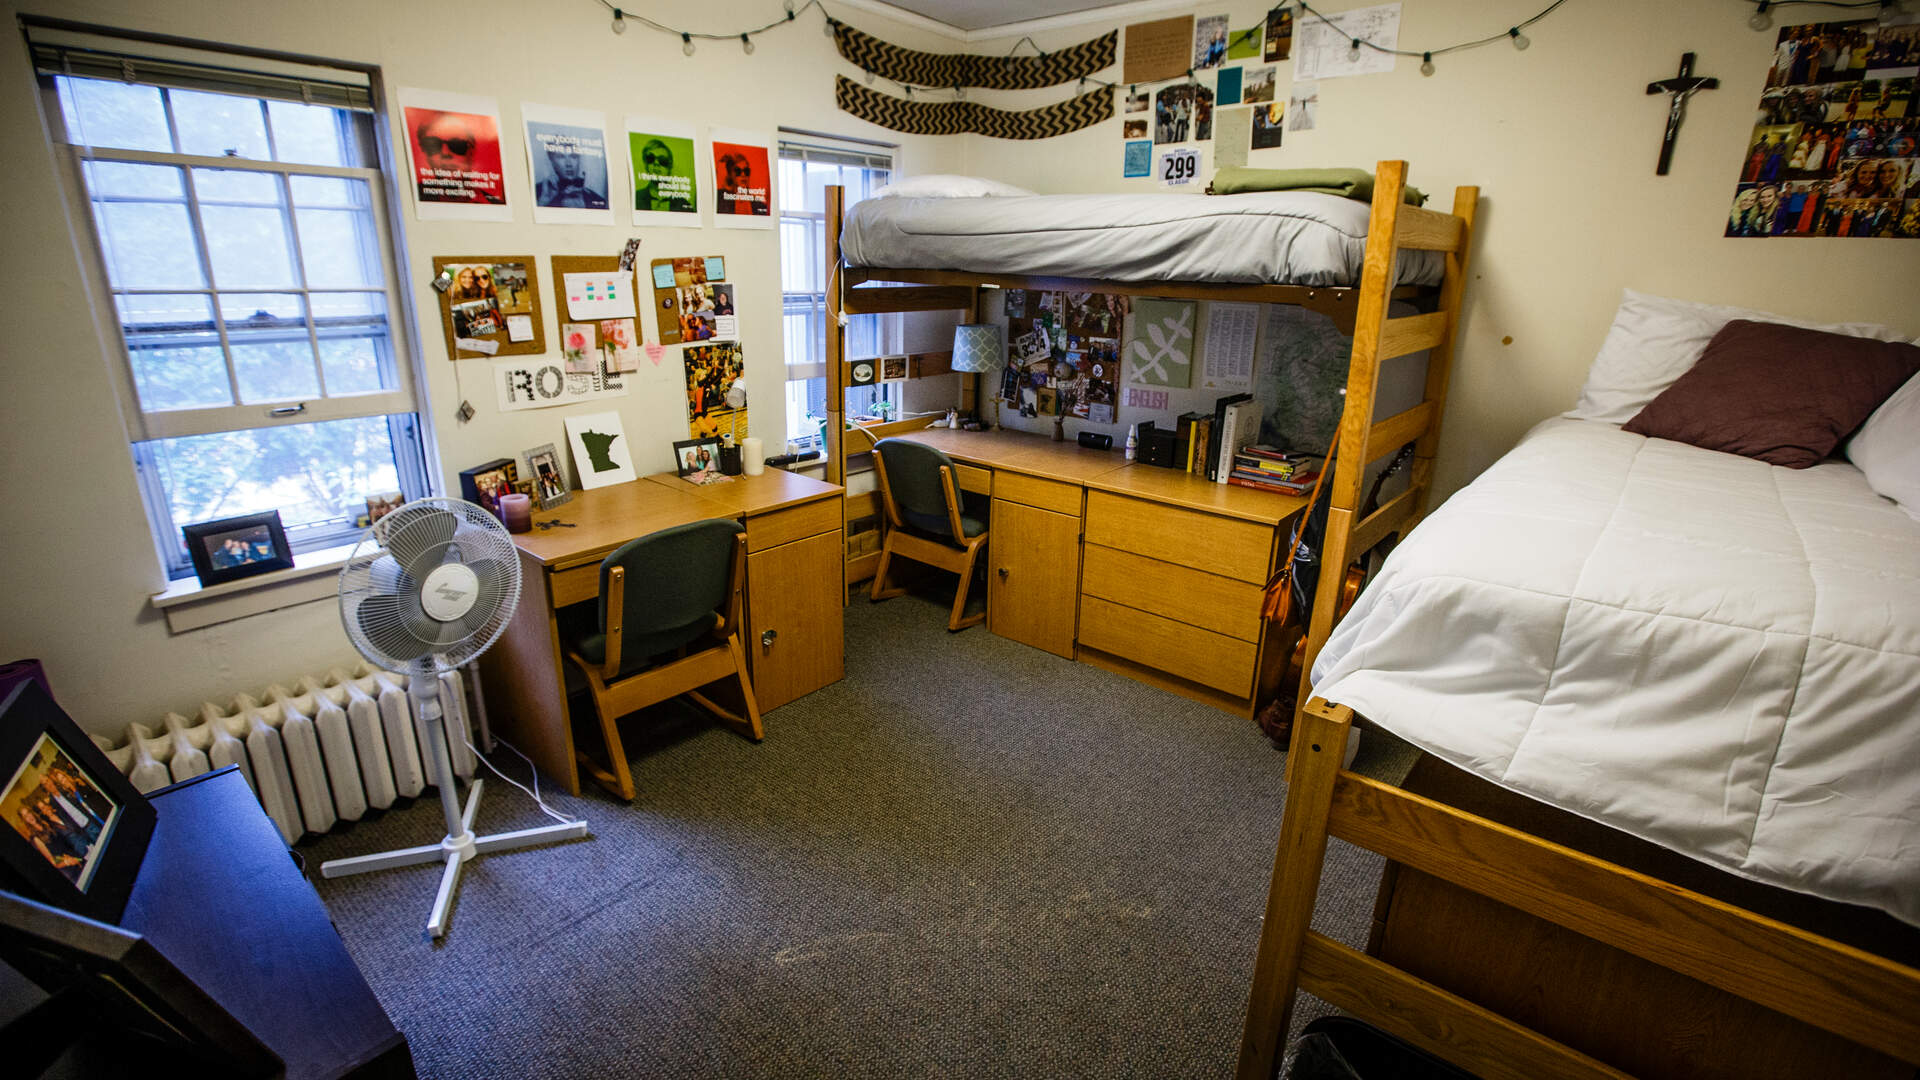 A student room in transfer student housing